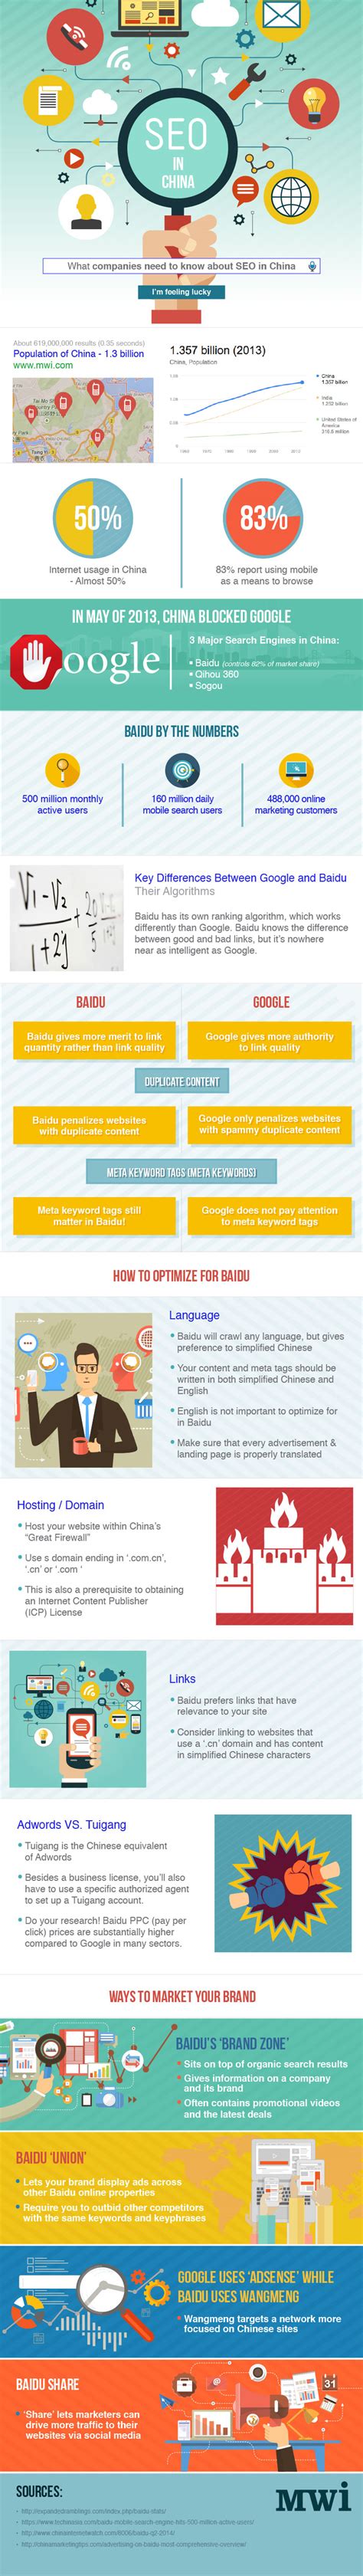 A Quick Guide to Local SEO in China | Truelogic Online Solutions, Inc